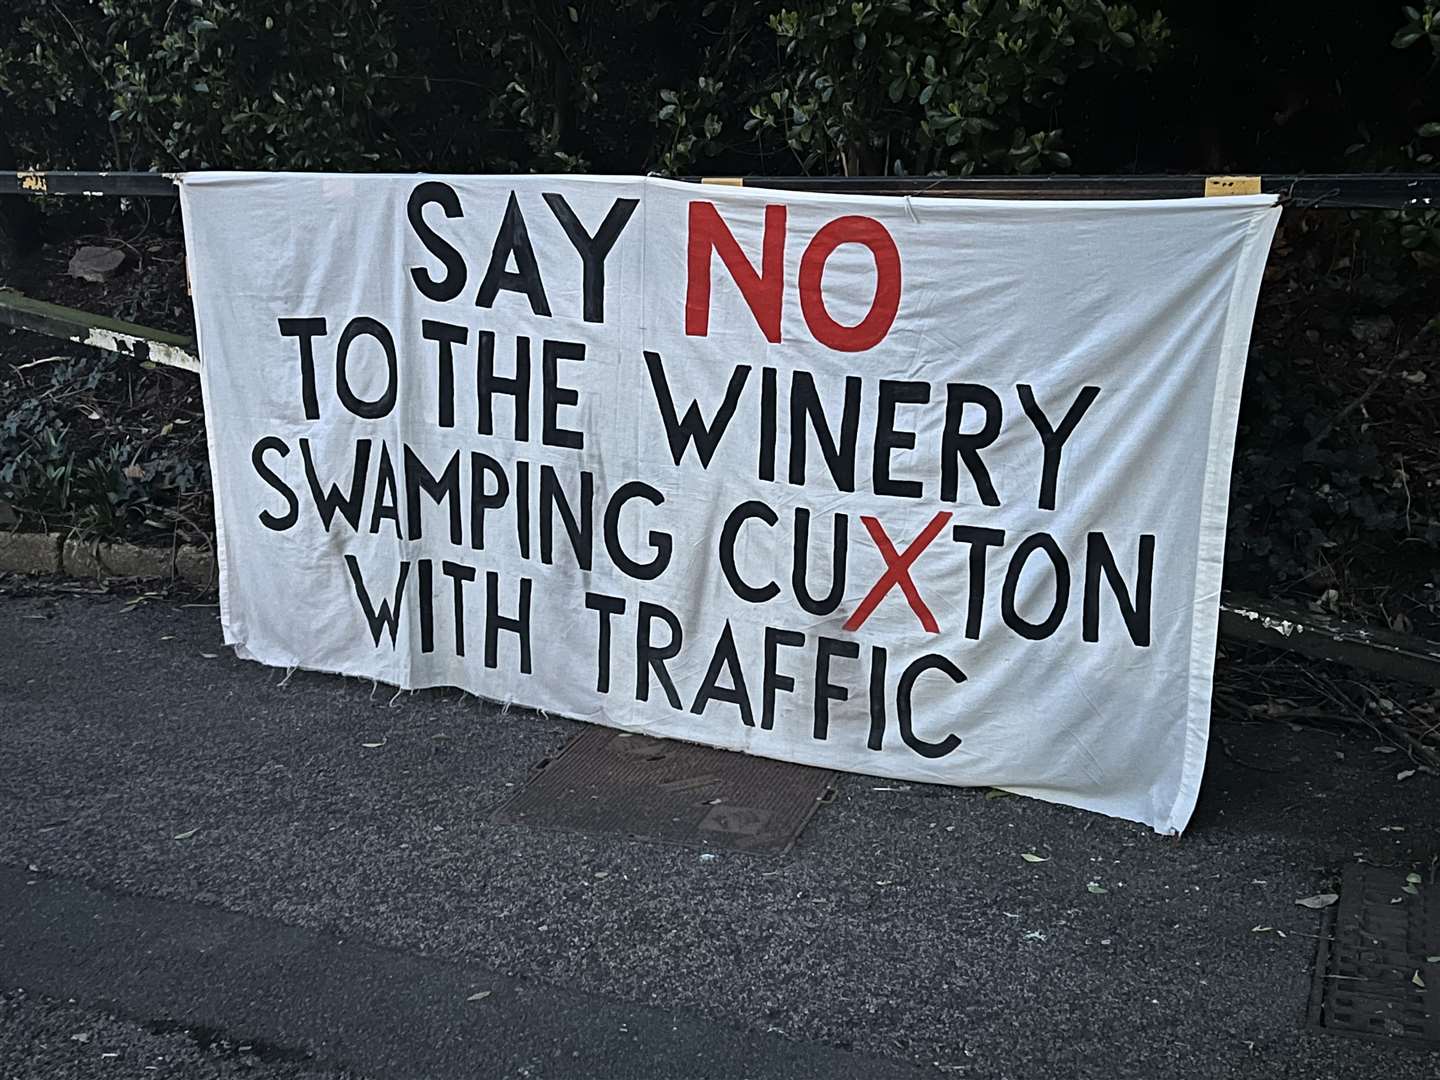 A petition opposing Vineyard Farms Ltd's plans for a bottling facility and visitor centre attracted over 1,000 signatures